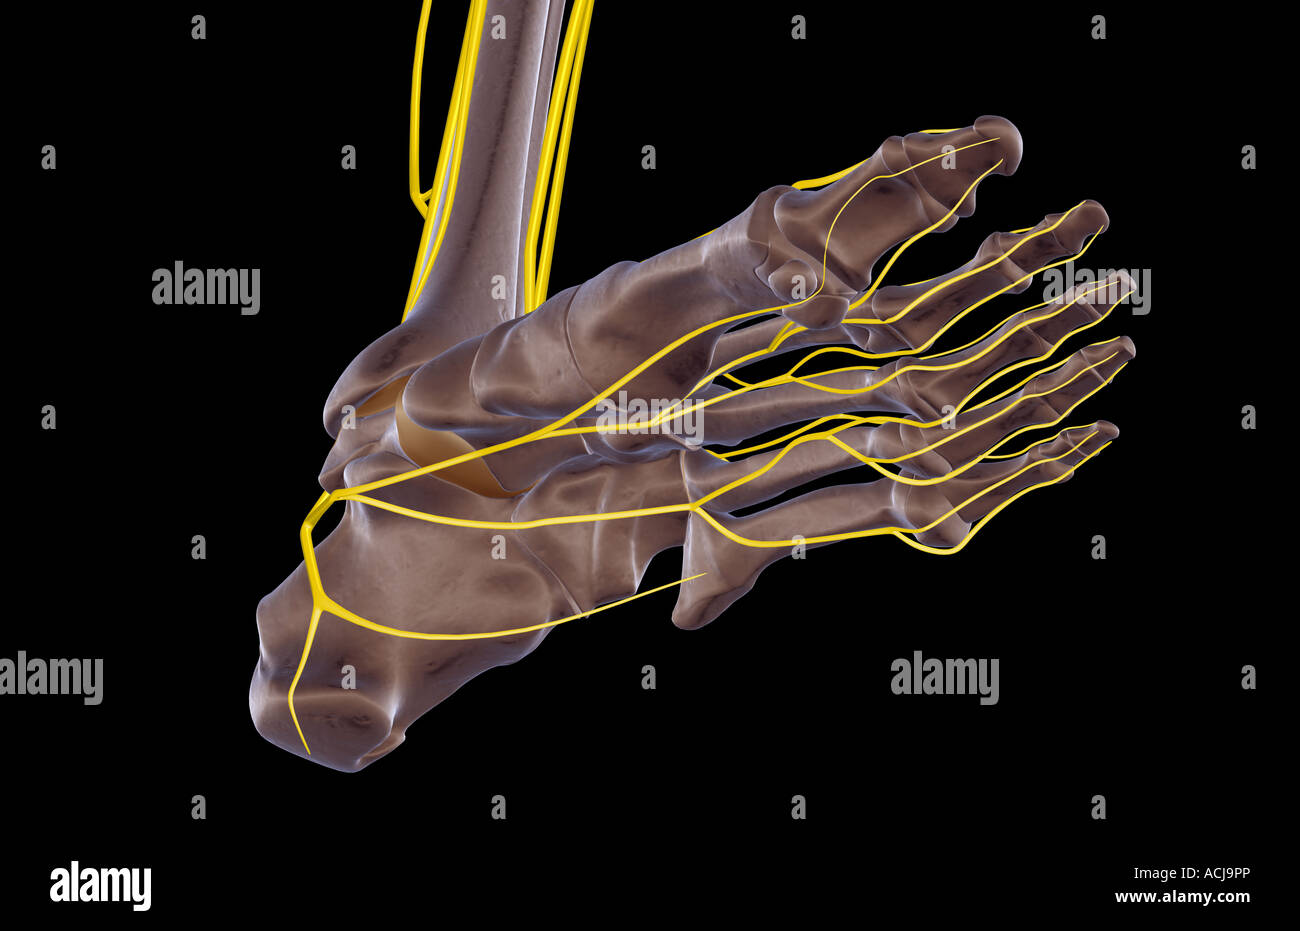 Medial Plantar Nerve High Resolution Stock Photography and Images - Alamy